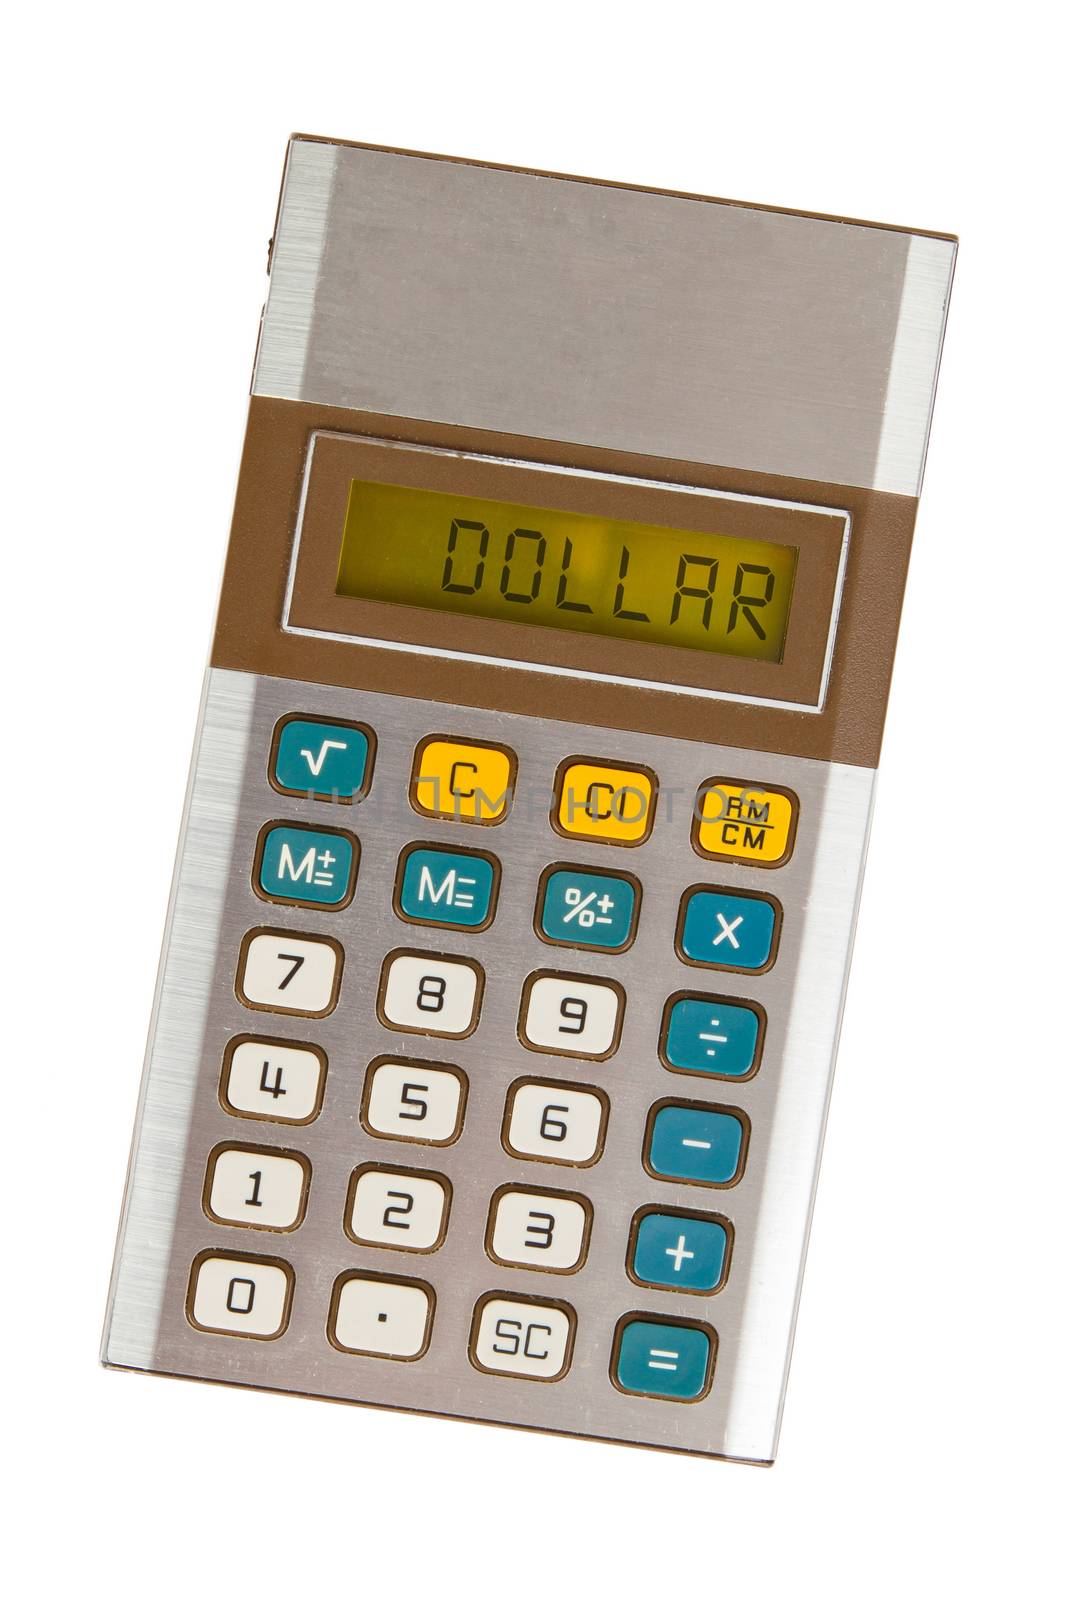 Old calculator showing a text on display - dollar